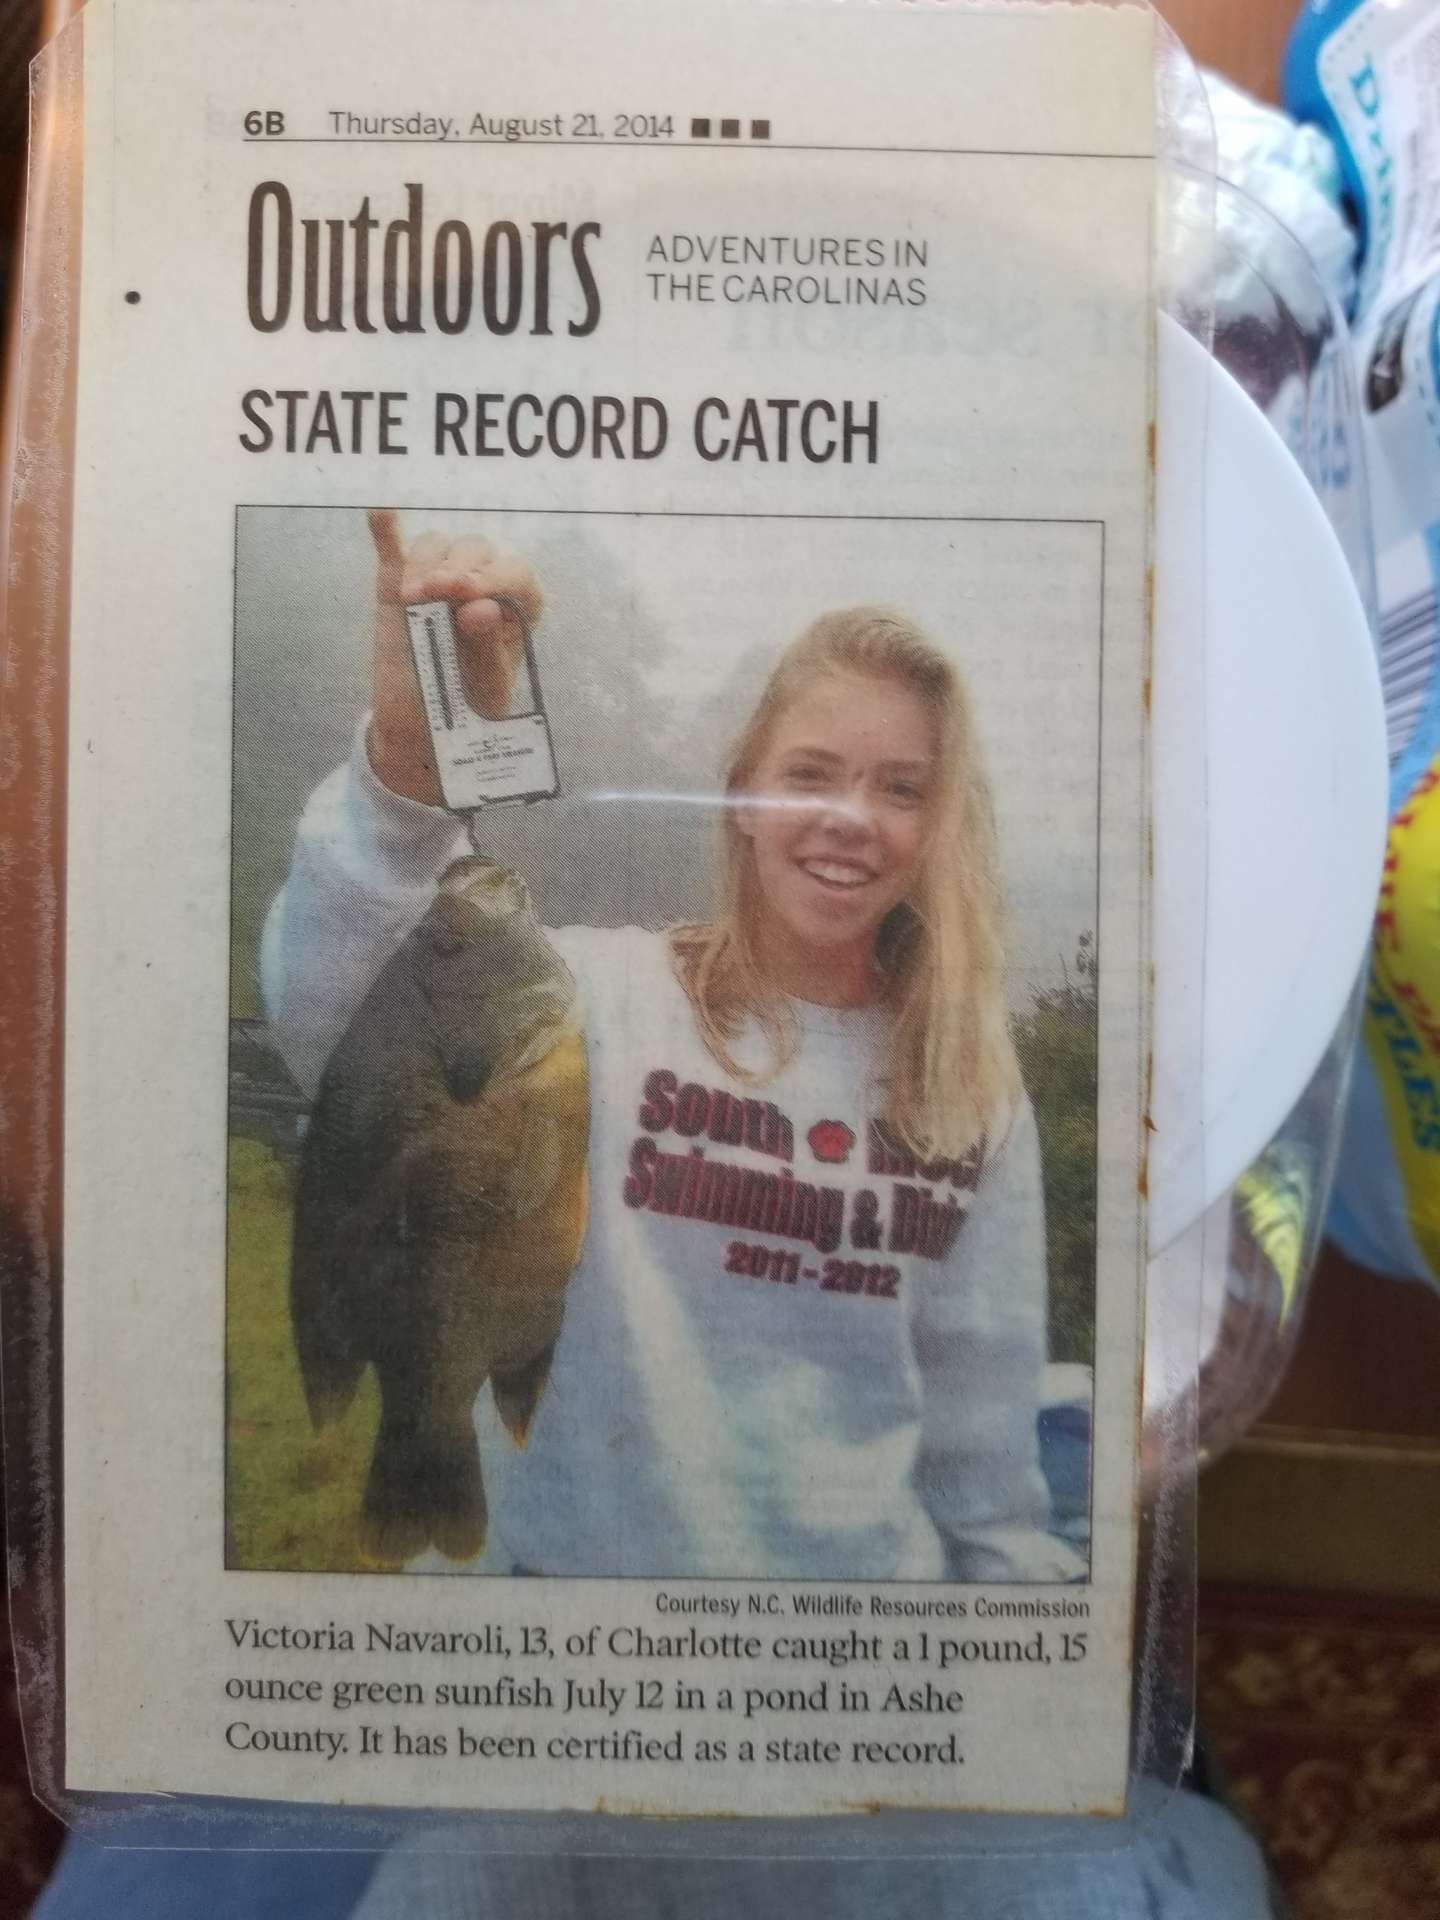 State Championship catch from Pond